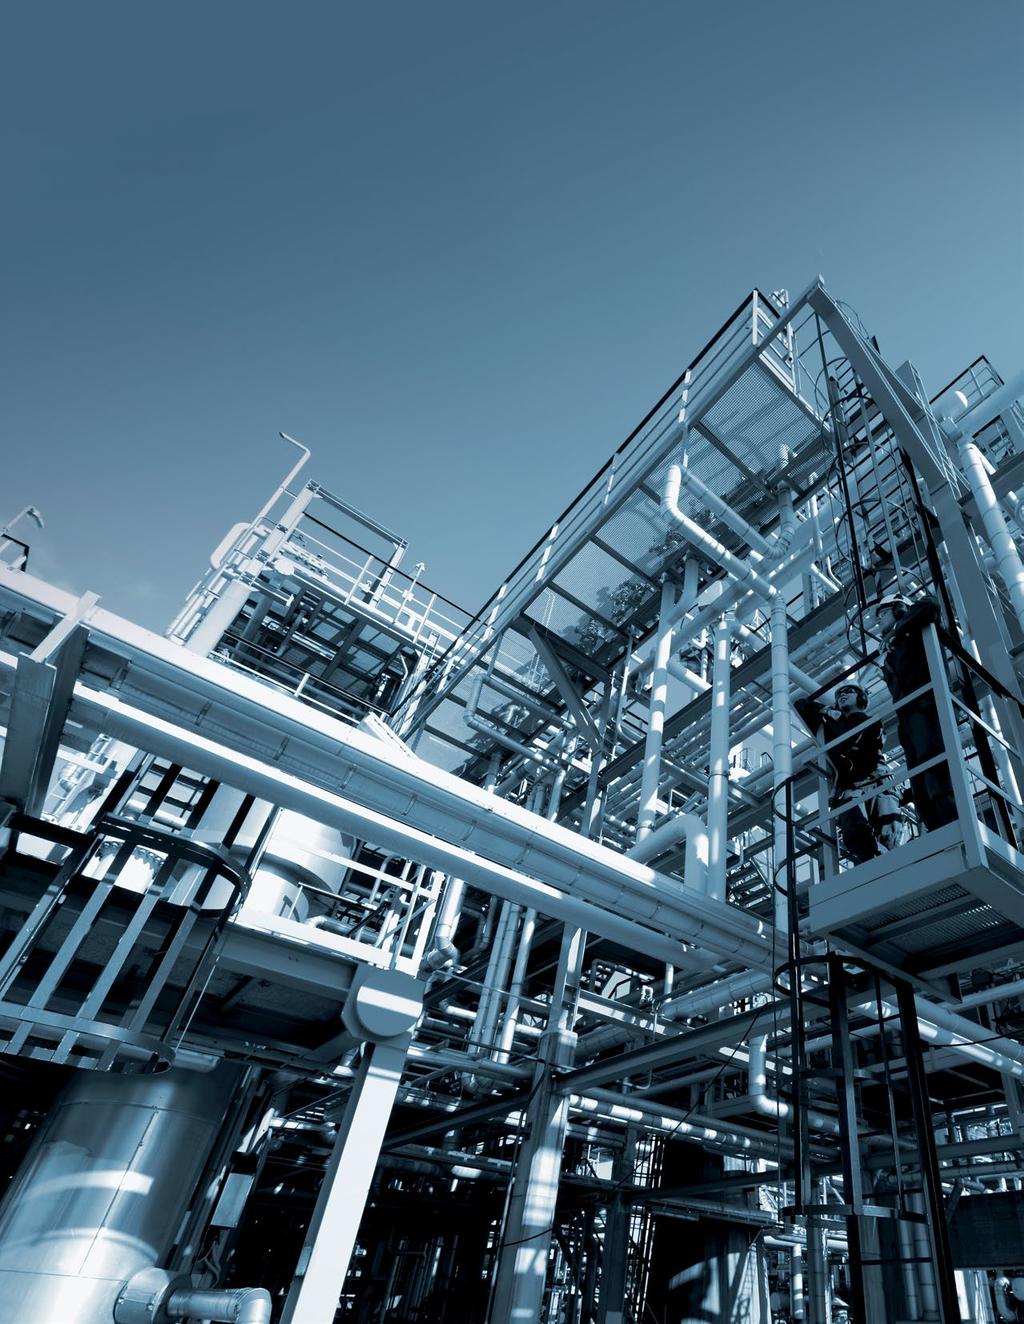 Petrochemical The petrochemical industry is one of the largest industries on the planet.